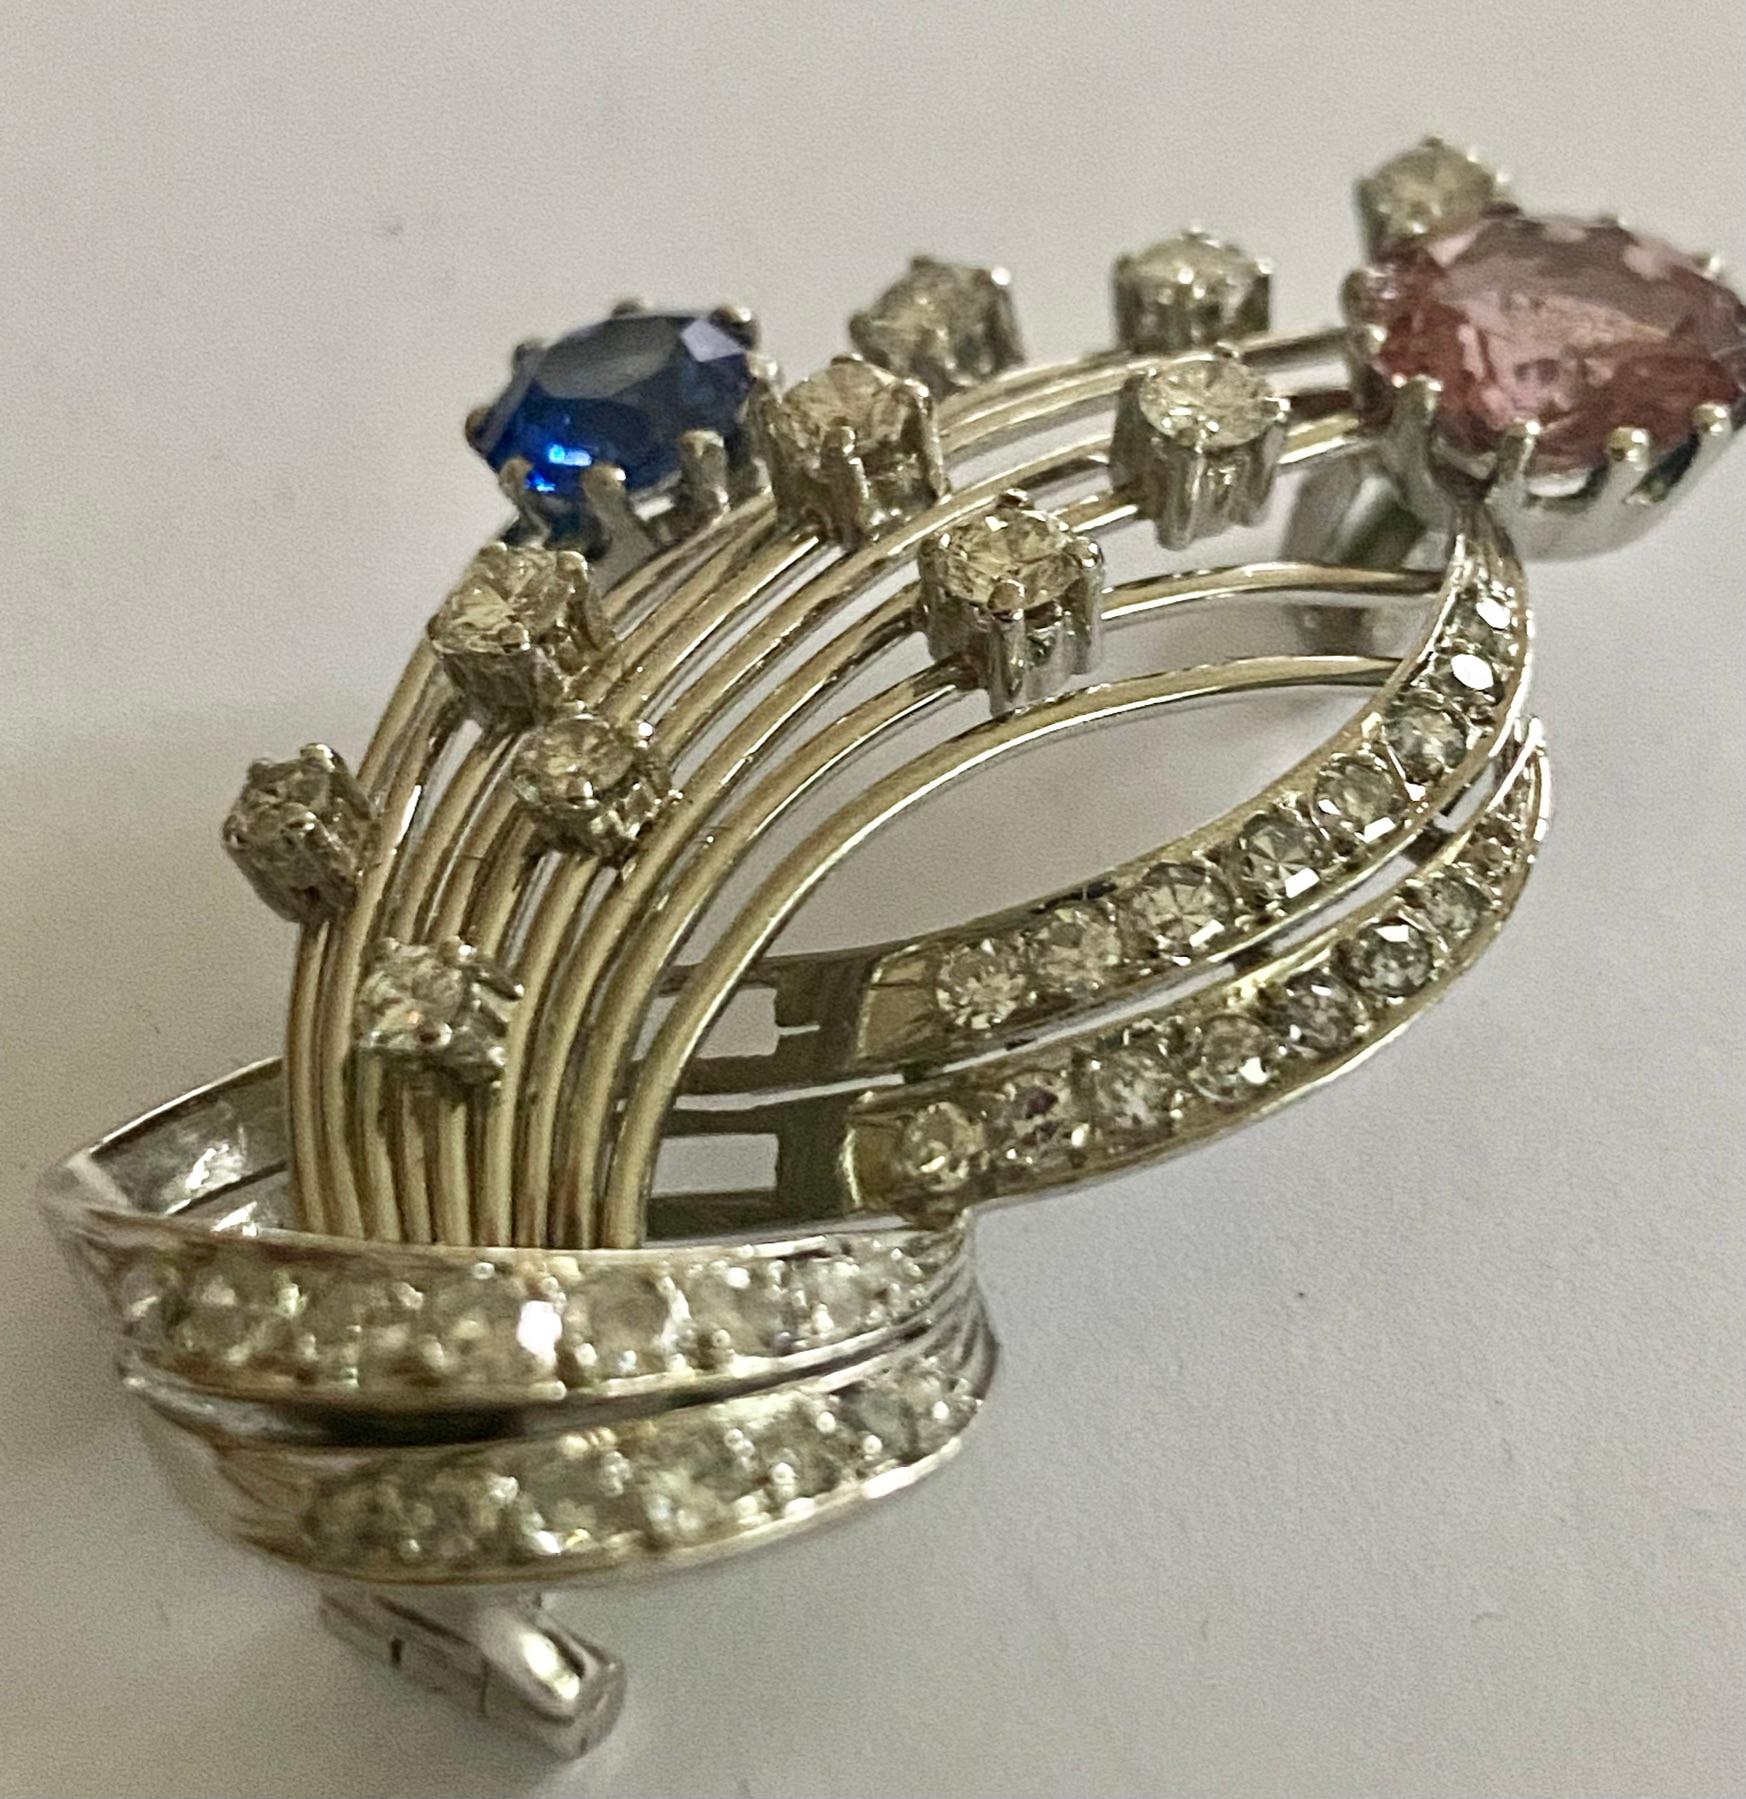 Platinum (960/-) Brooch
- Style: Art Deco ca 1930, made in Eastern Europe.
- Weight: 15.13 grams, size: 45 x 28 x 5 mm.
- 1 blue sapphire, weighing: 1.30 ct (untreated)
- 1 Rose Tourmaline, weighing 2.53 ct
- 40 diamonds in various cuts = approx.